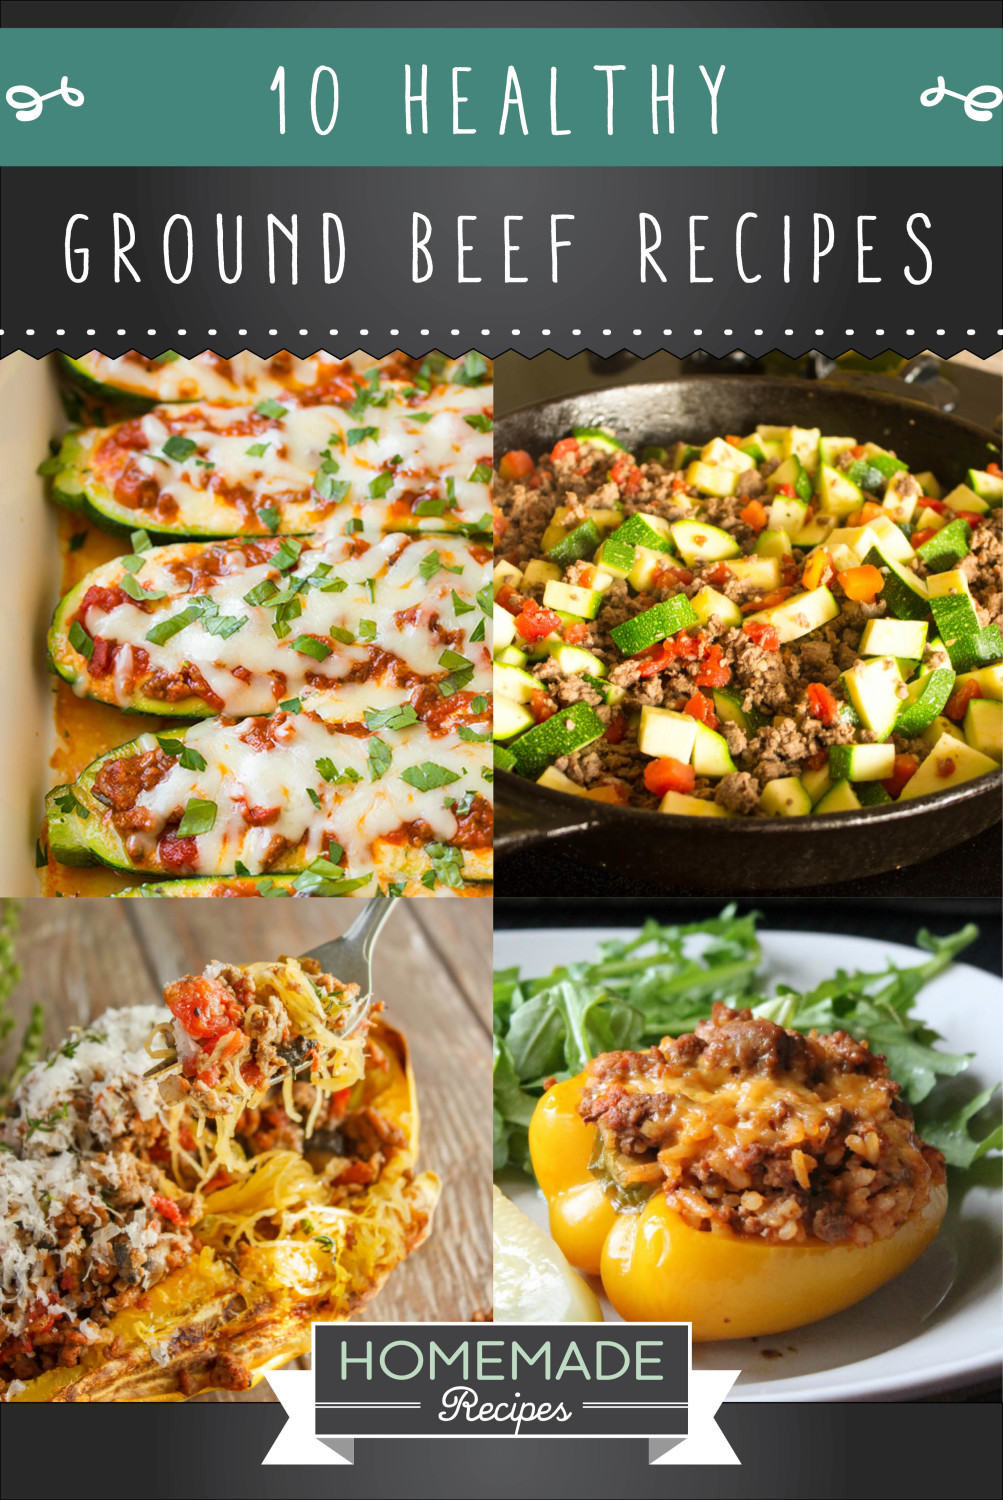 Healthy Dishes With Ground Beef
 10 Healthy Ground Beef Recipes